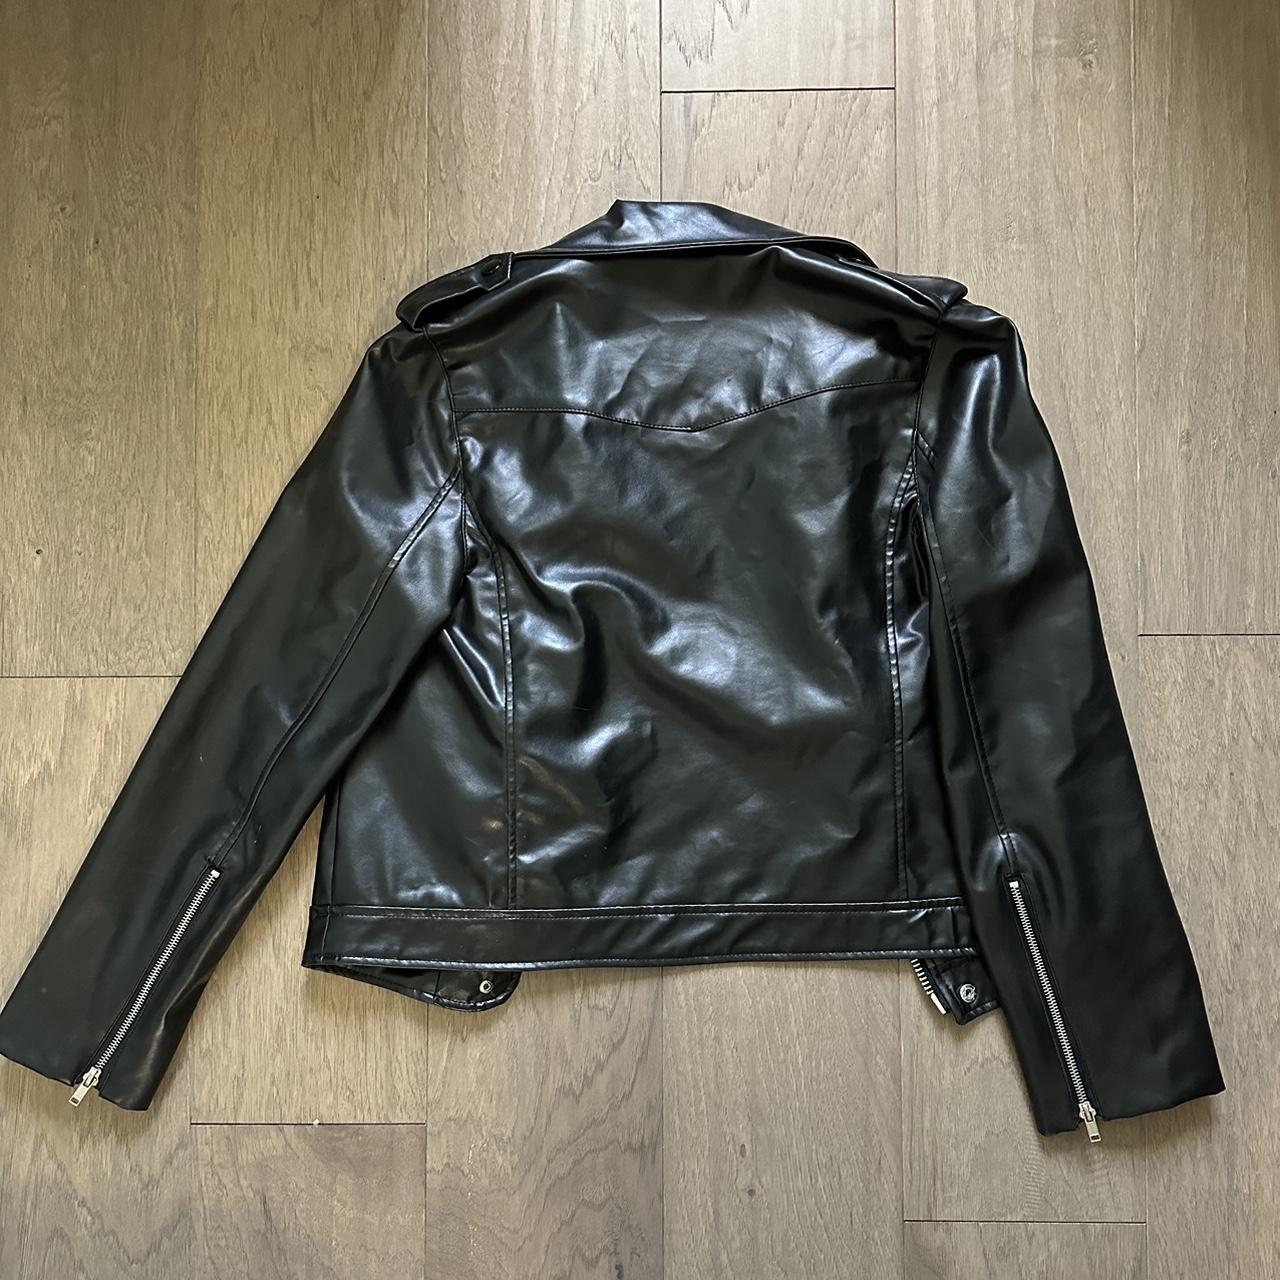 Luii faux leather jacket Size small #leather... - Depop